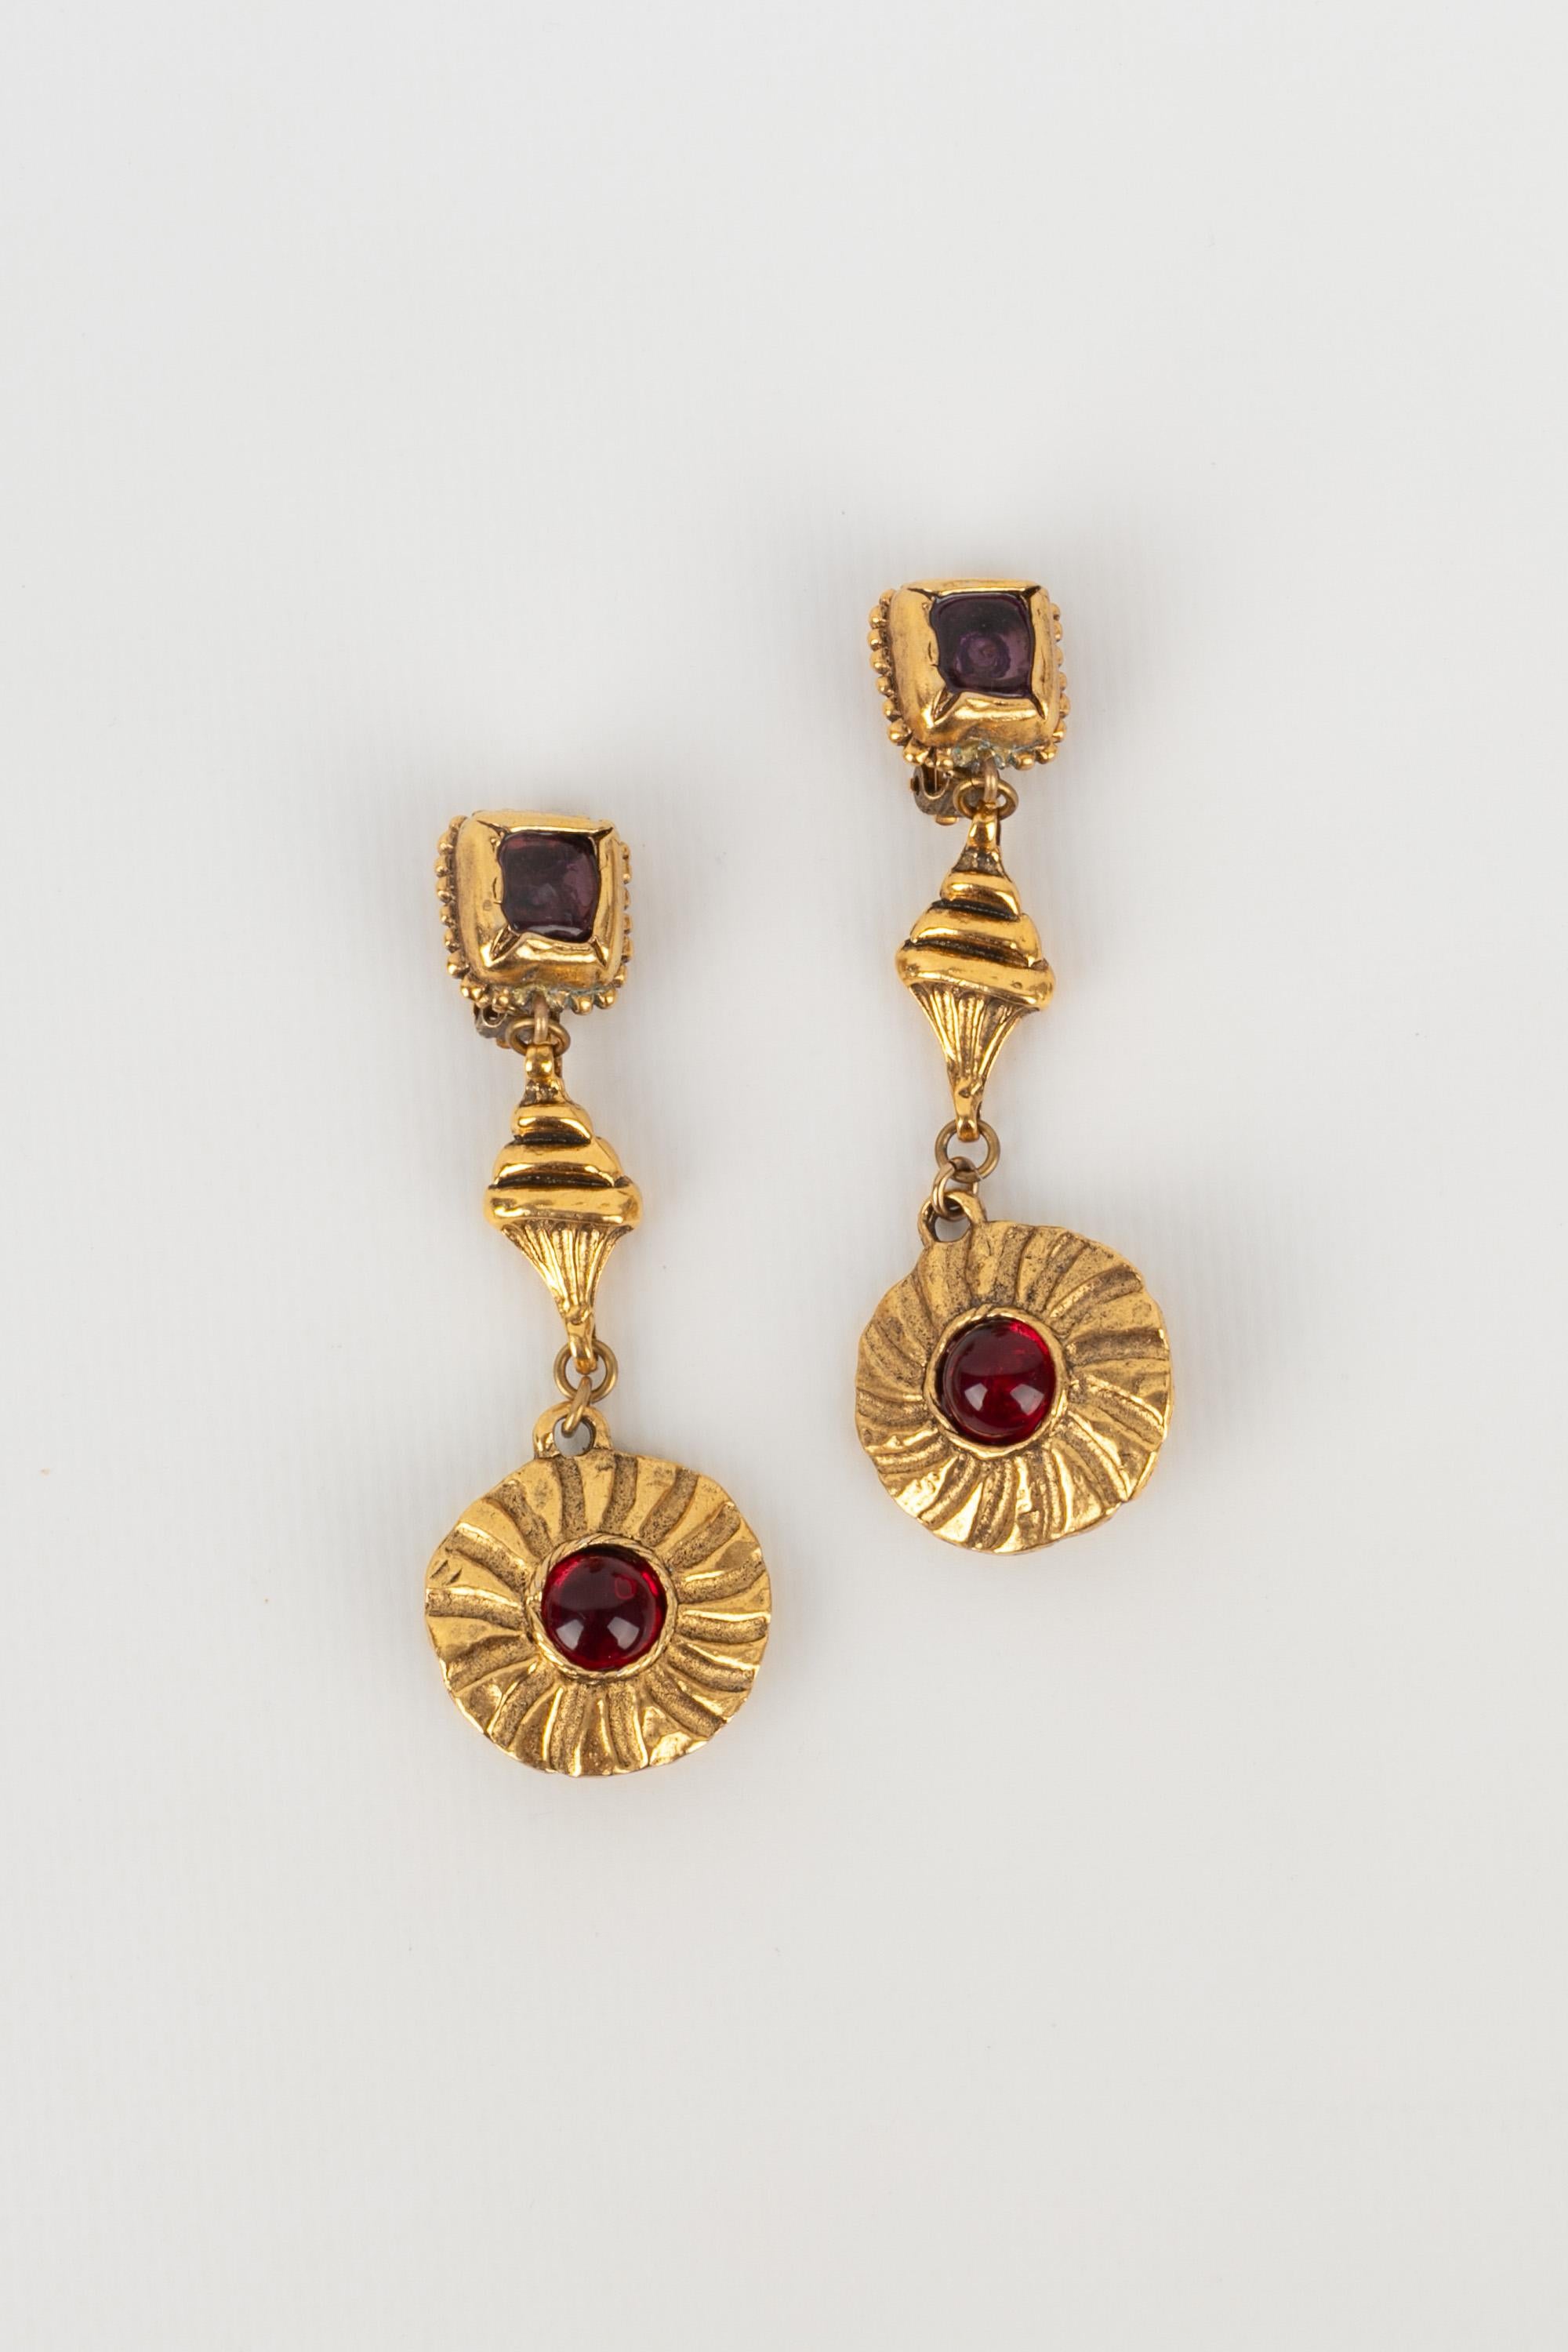 CHANEL - (Made in France) Golden metal earrings with glass paste. Jewelry from the 1980s.

Condition:
Very good condition

Dimensions:
Length: 7.5 cm

BOB137